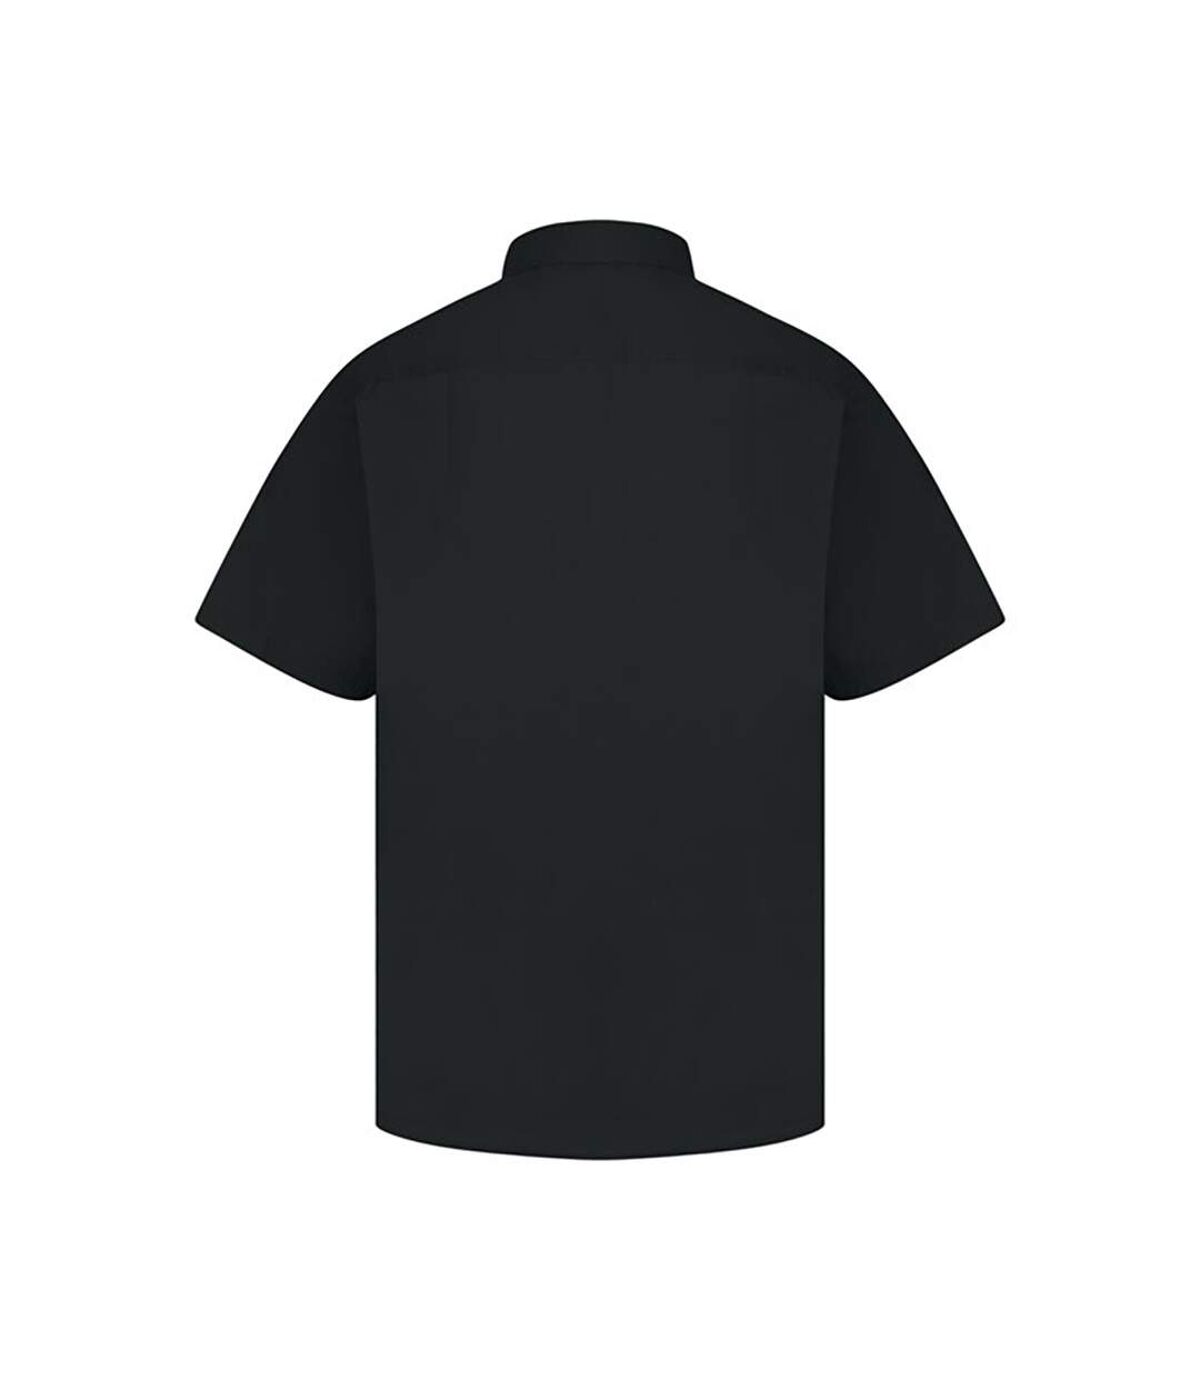 Absolute Apparel - Chemise manches courtes - Homme (Noir) - UTAB118